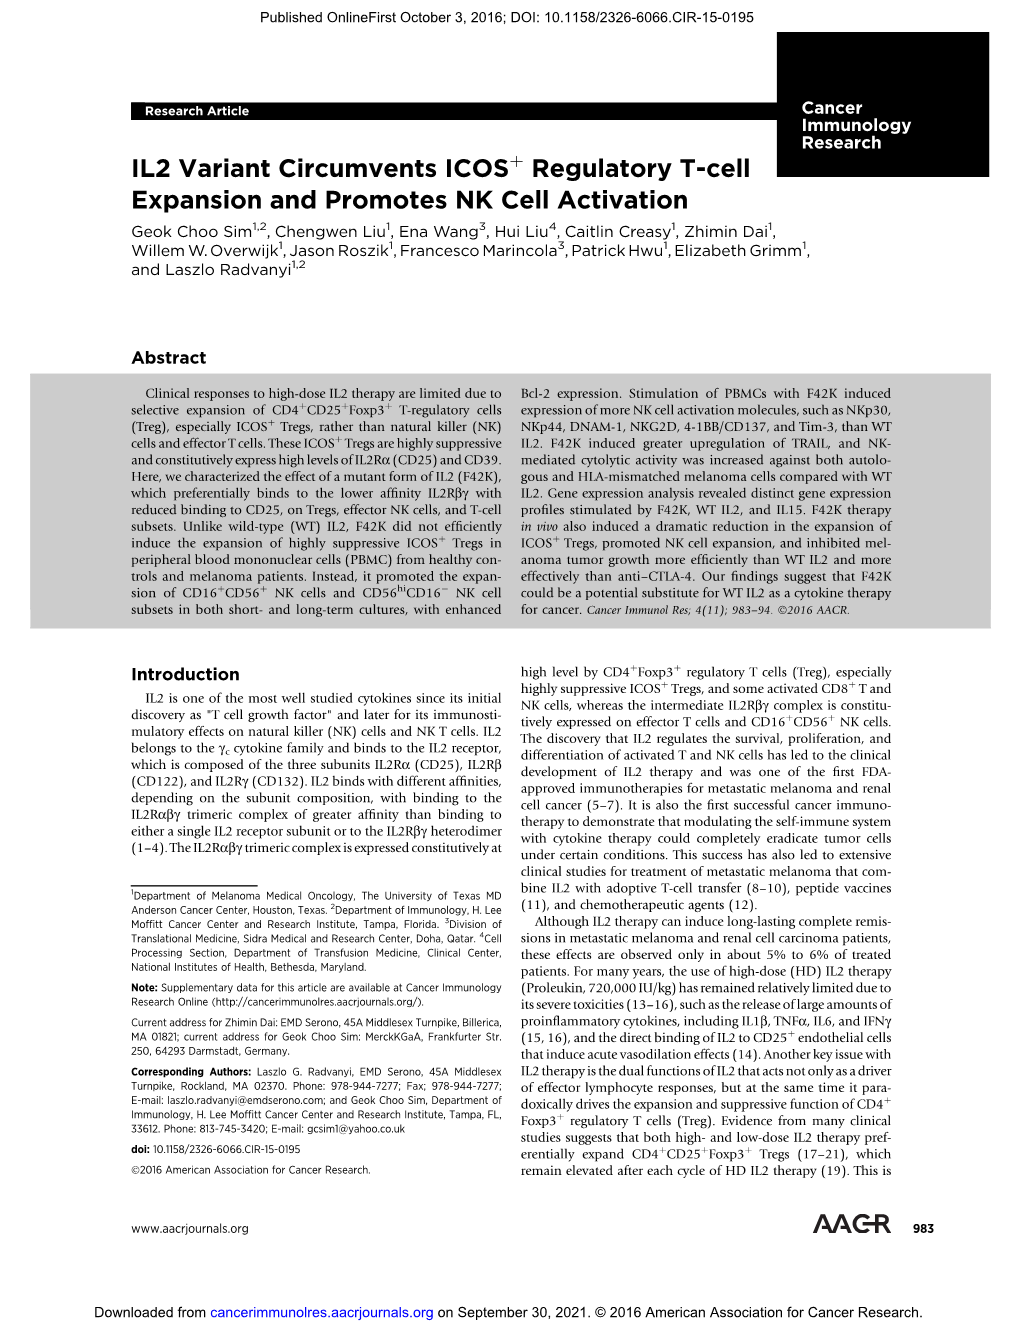 IL2 Variant Circumvents ICOS Regulatory T-Cell Expansion And